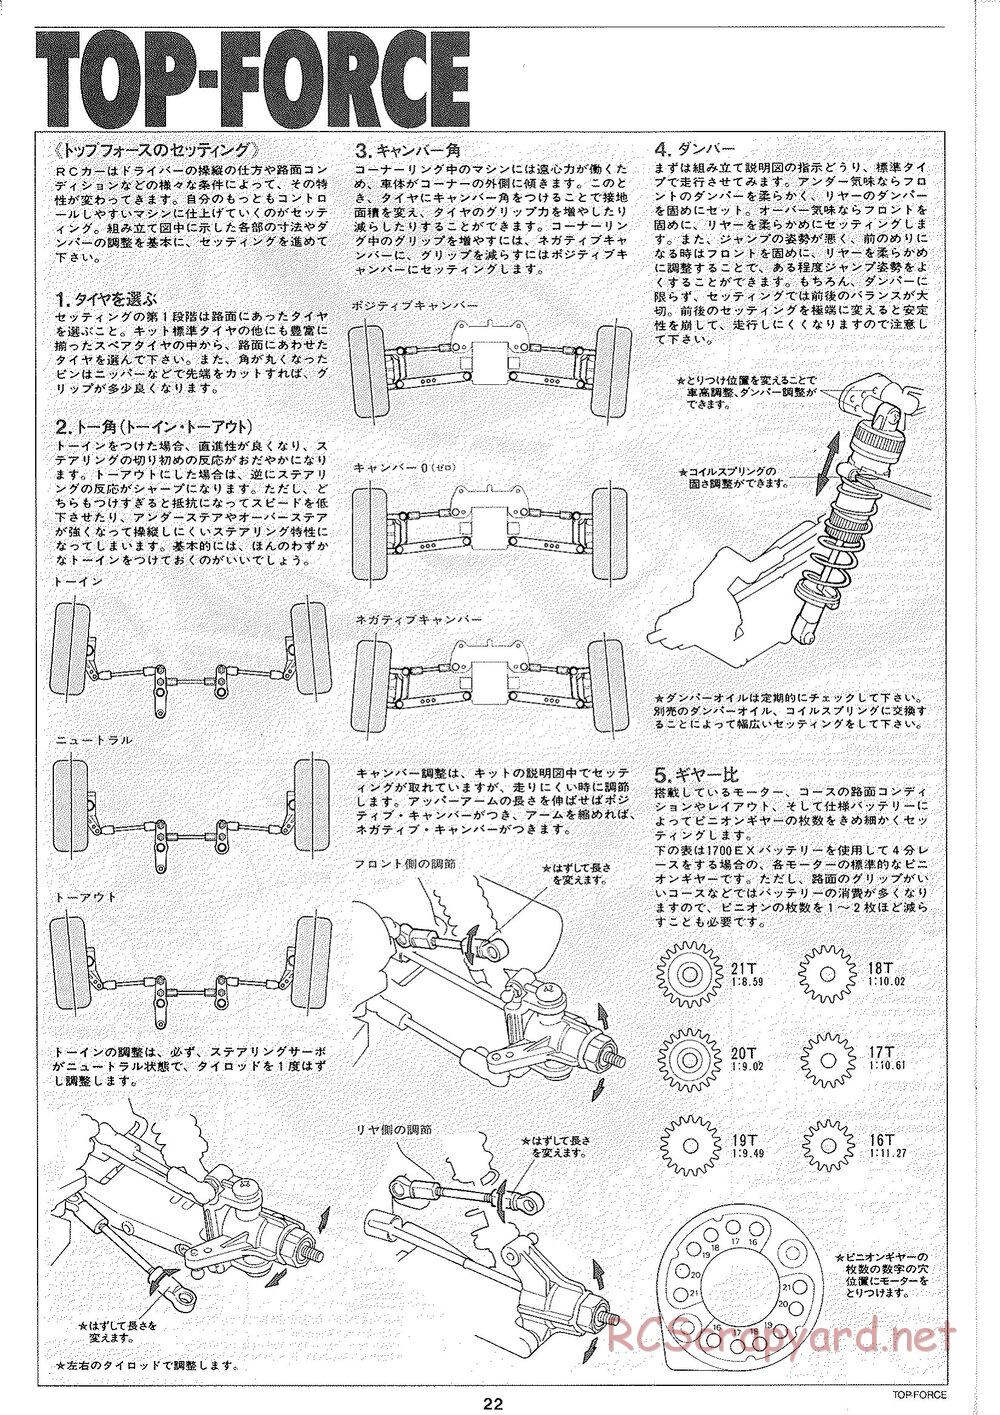 Tamiya - Top Force 2005 - DF-01 Chassis - Manual - Page 22